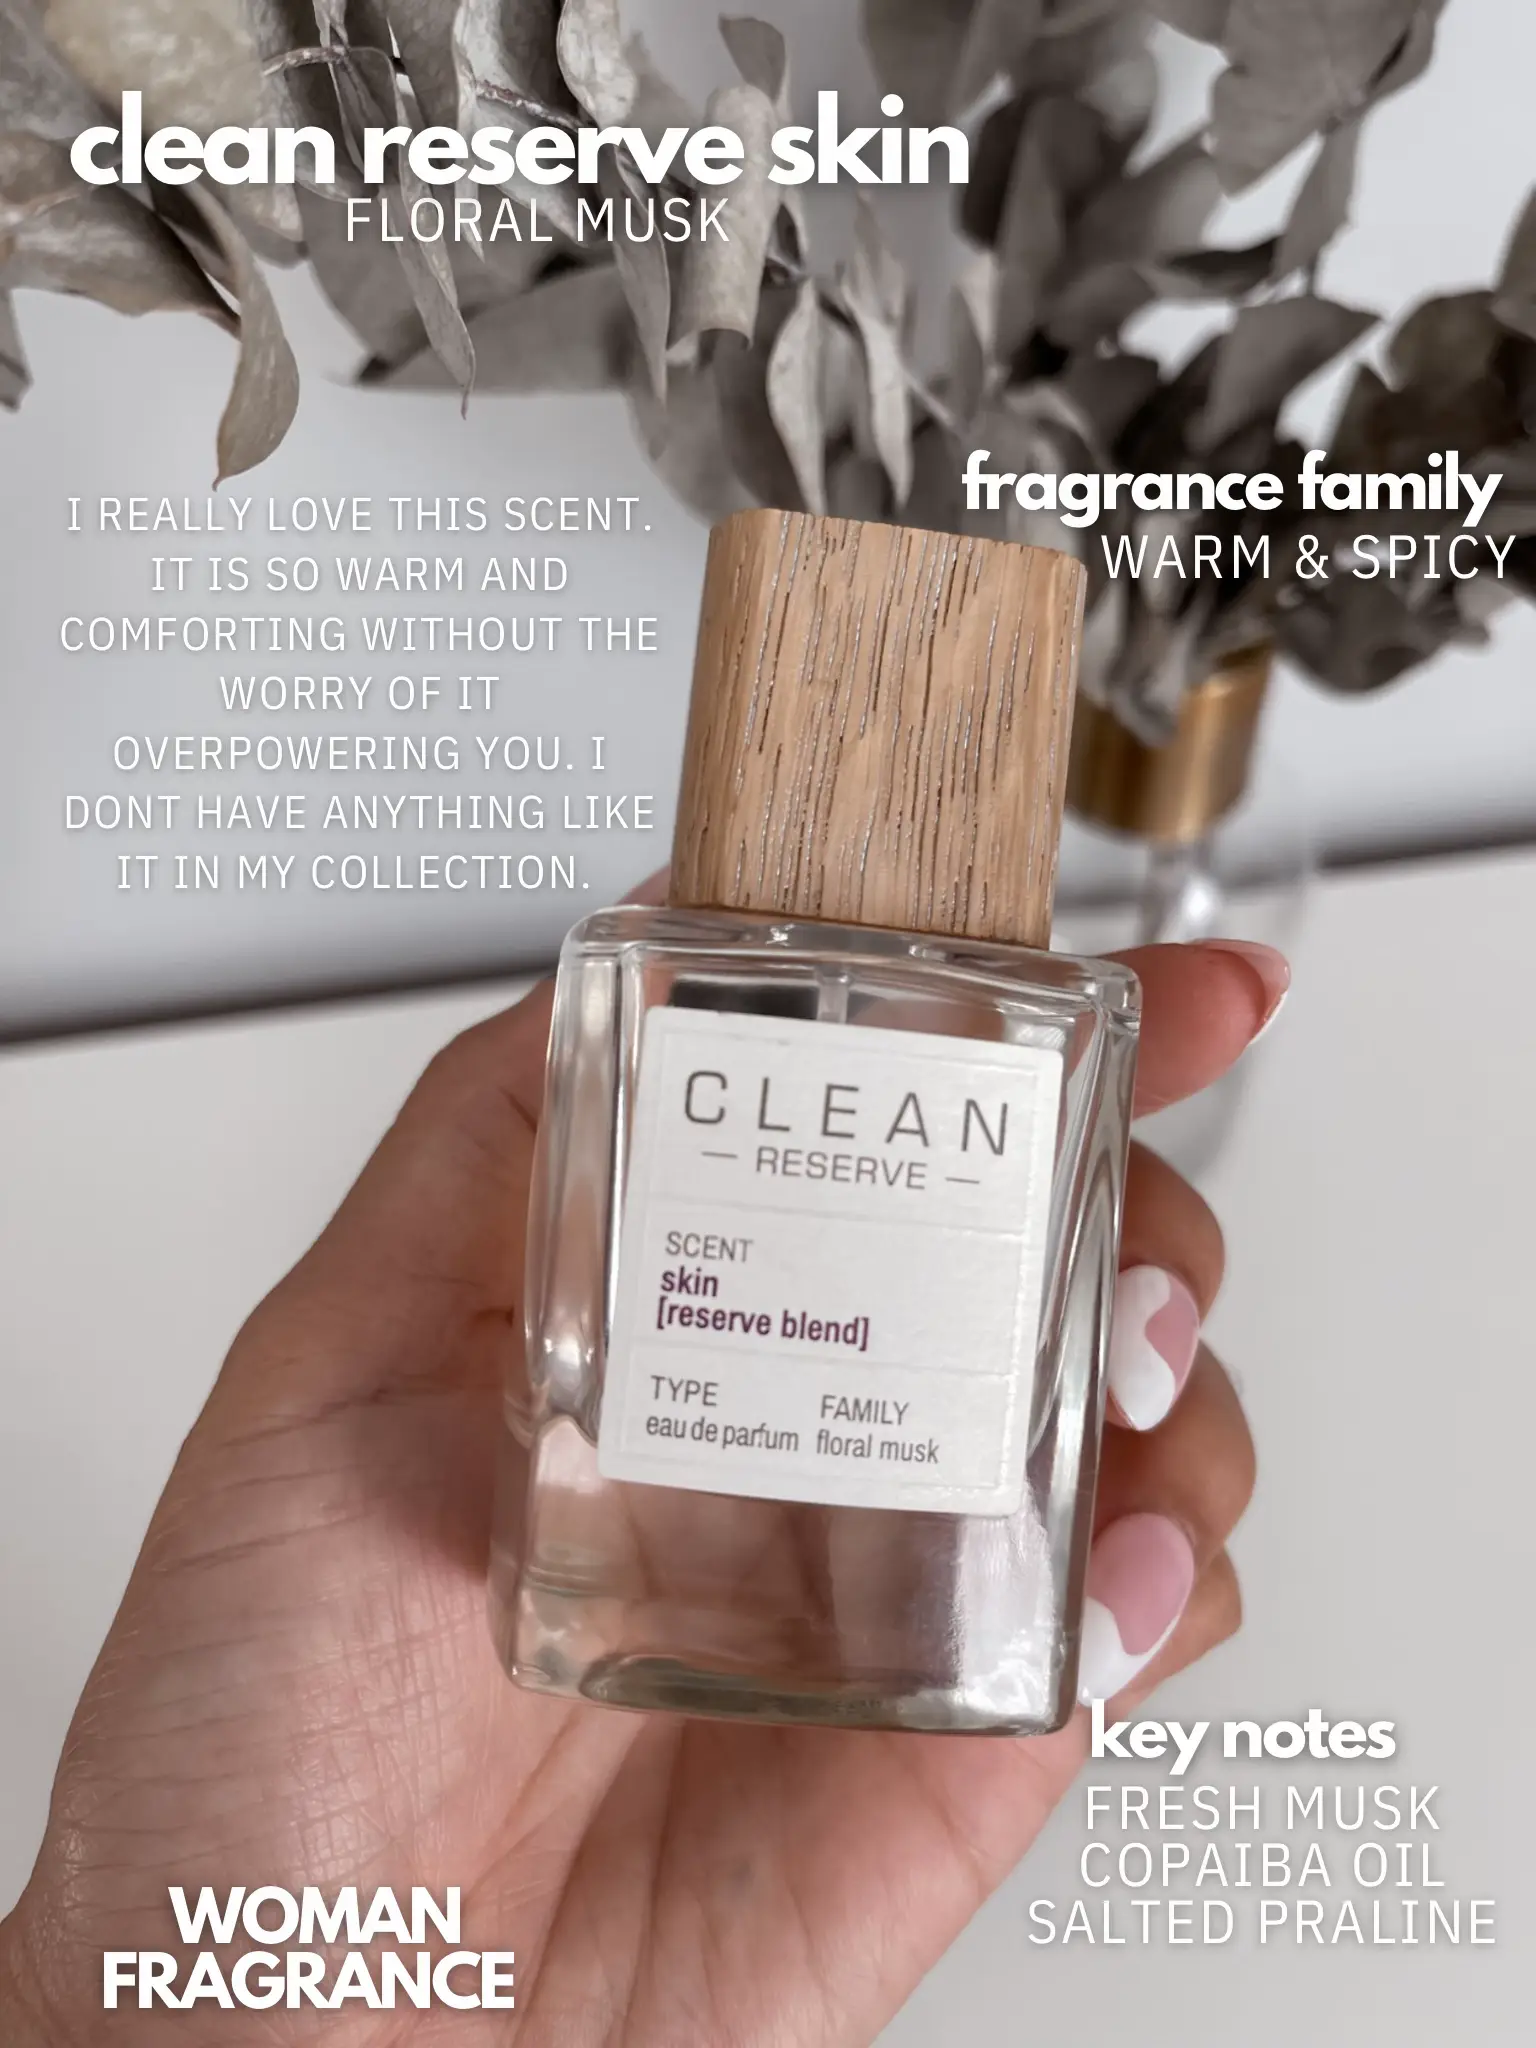 WHOLESOME FRAGRANCES FOR HER ᥫ᭡, Gallery posted by ESSENCEJANAYᥫ᭡